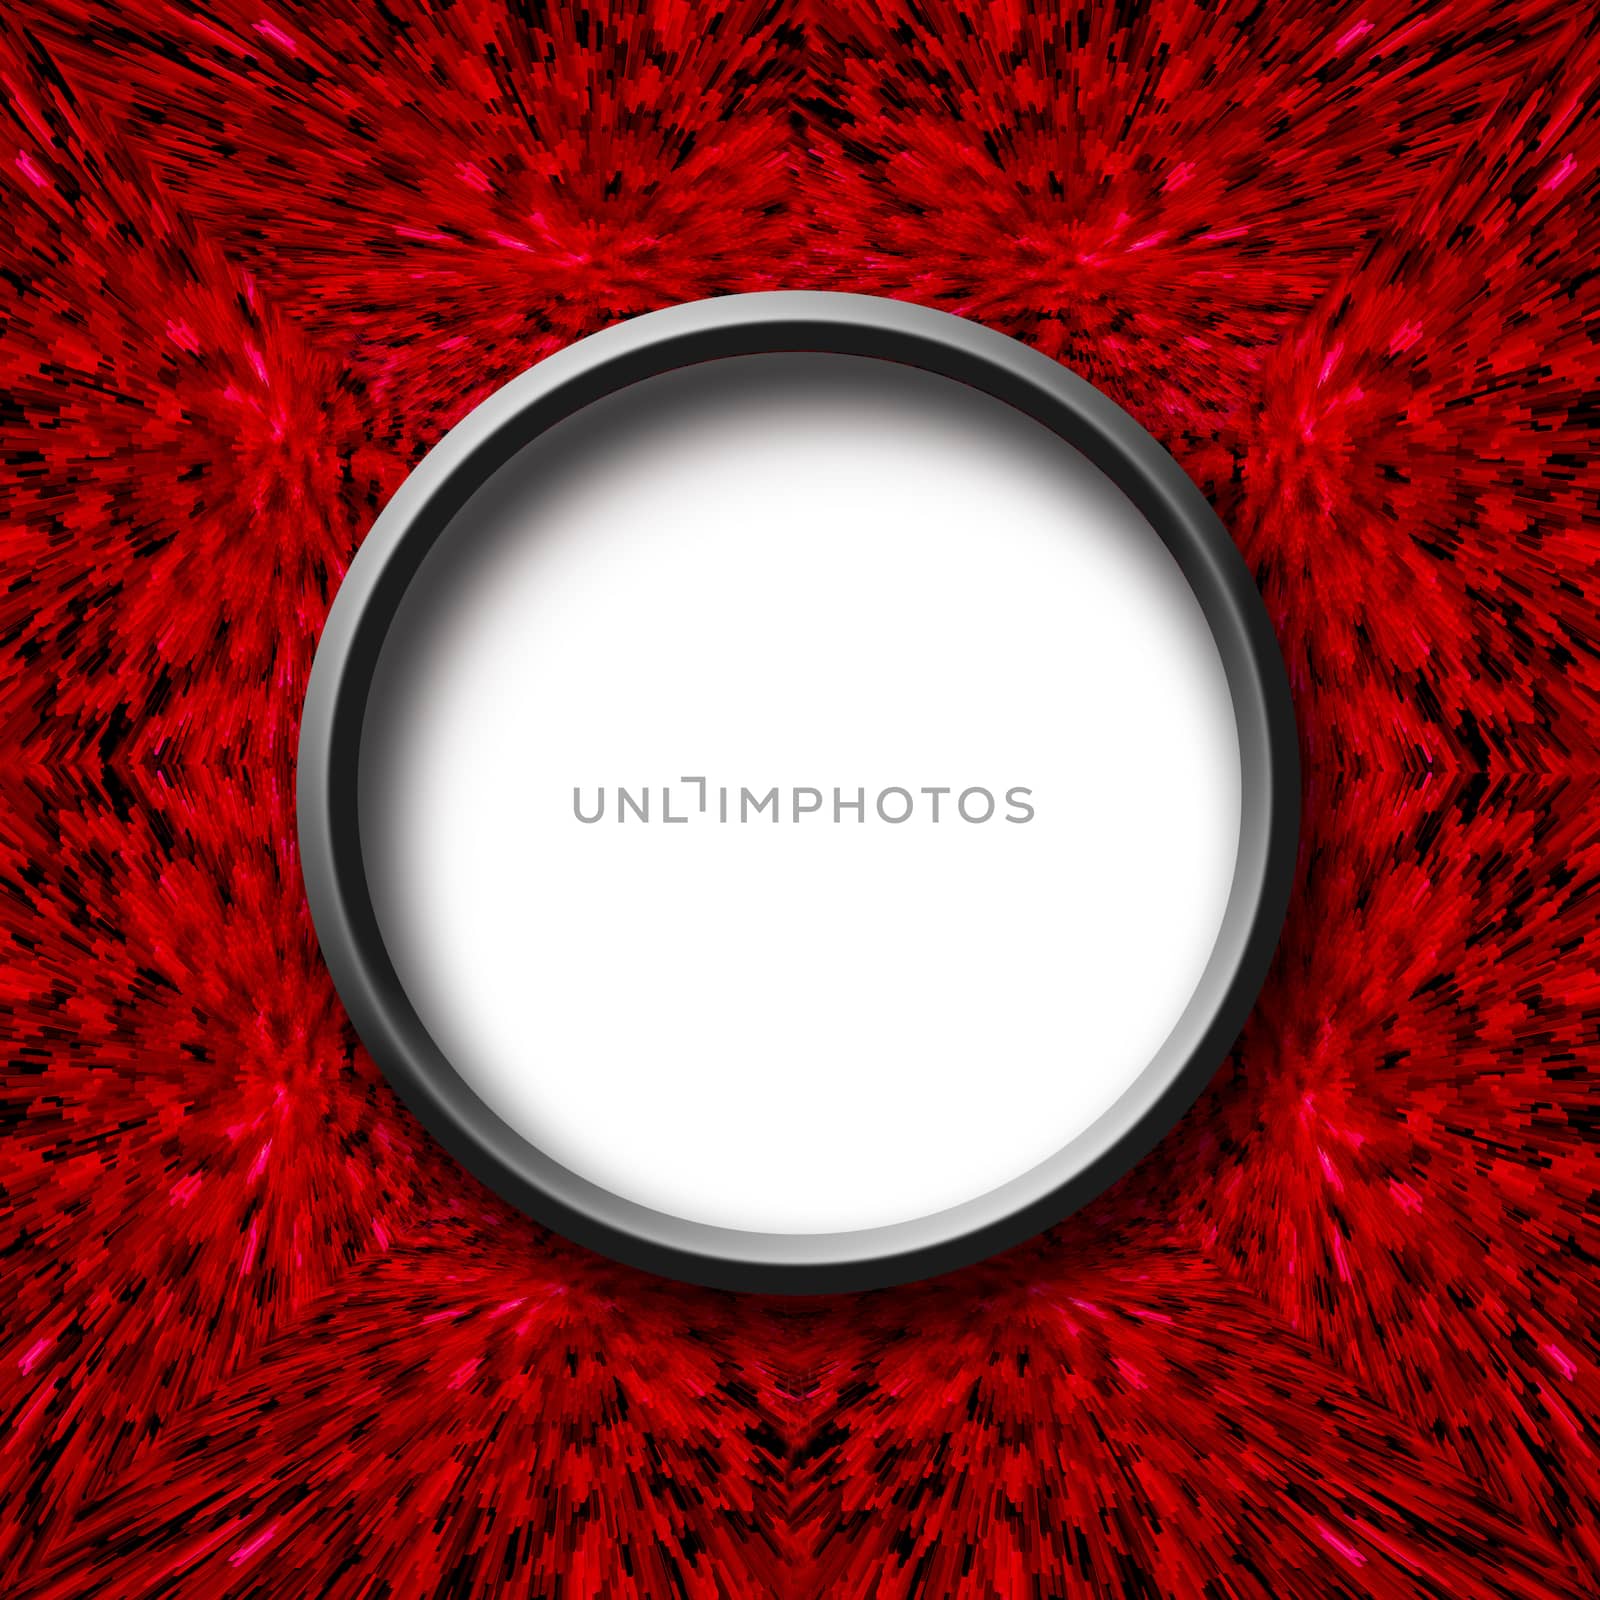 red abstract texture with round metallic center